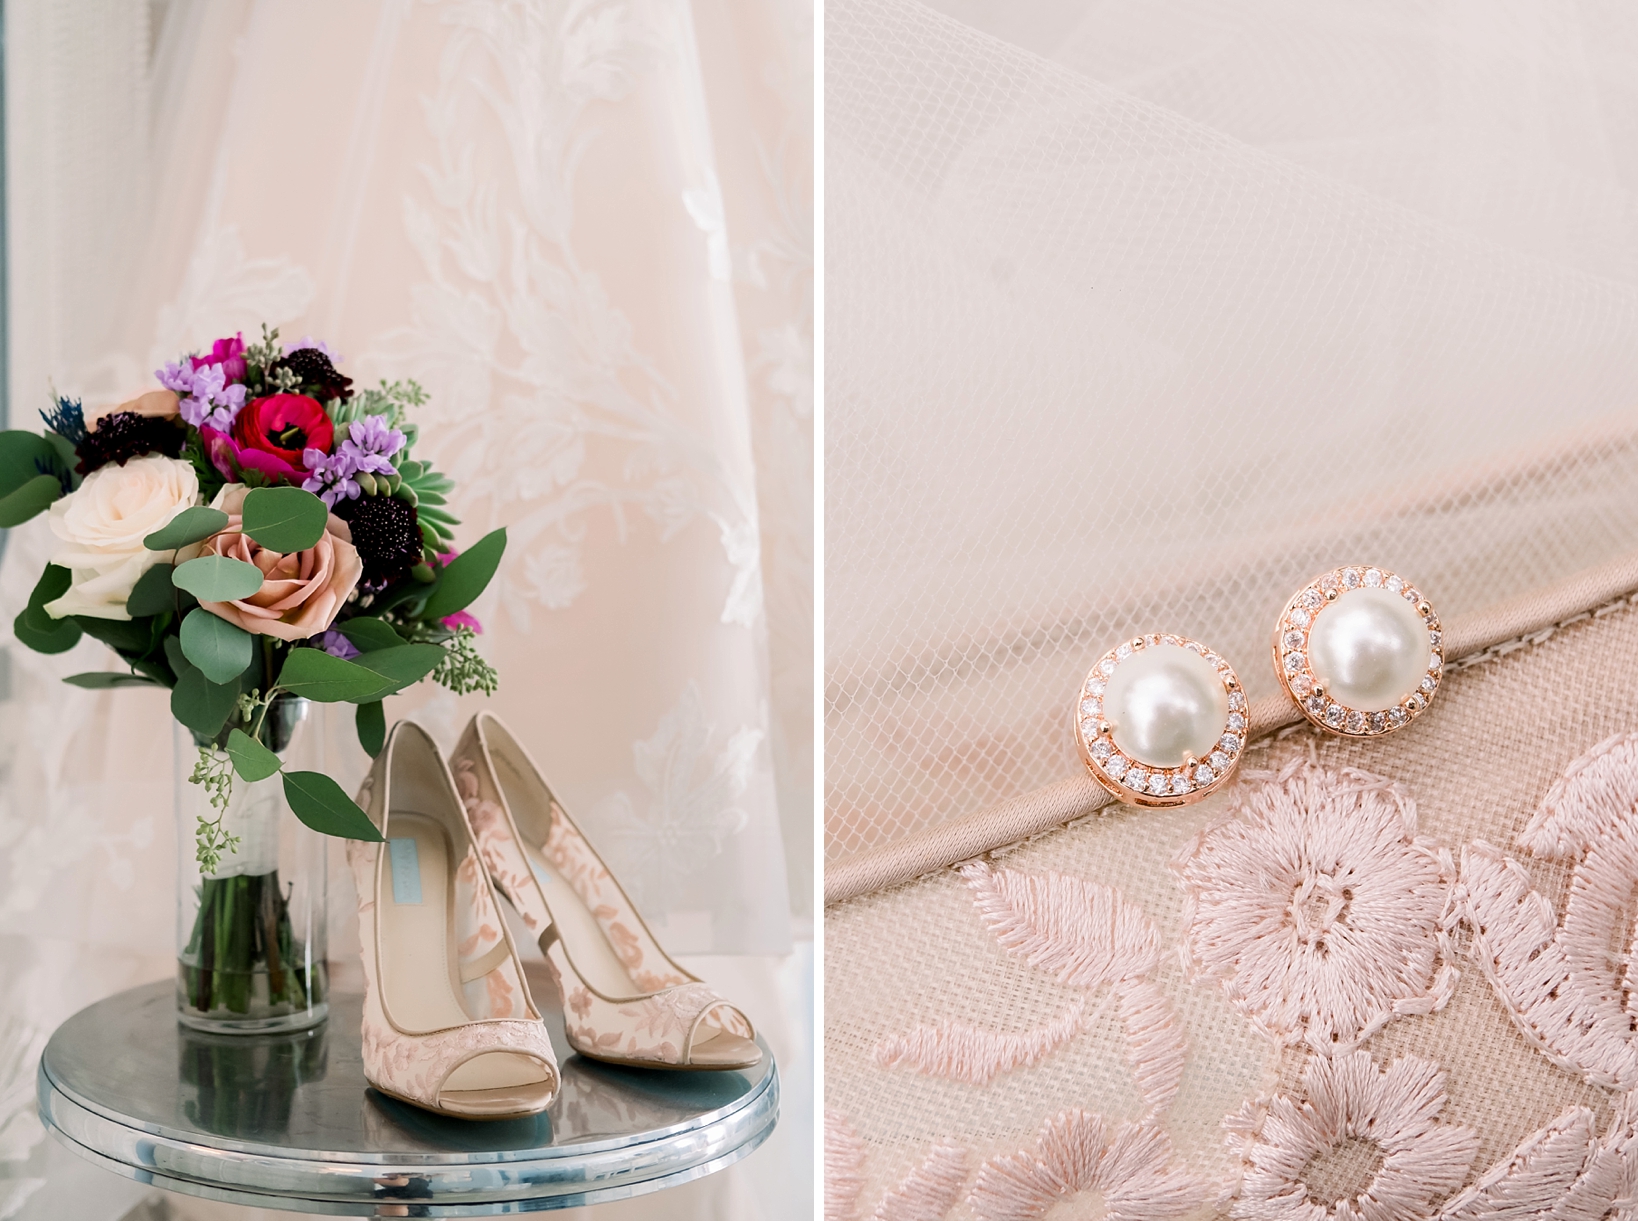 The Bride's shoes and her Floral Bouquet with a close up of the pearl earrings